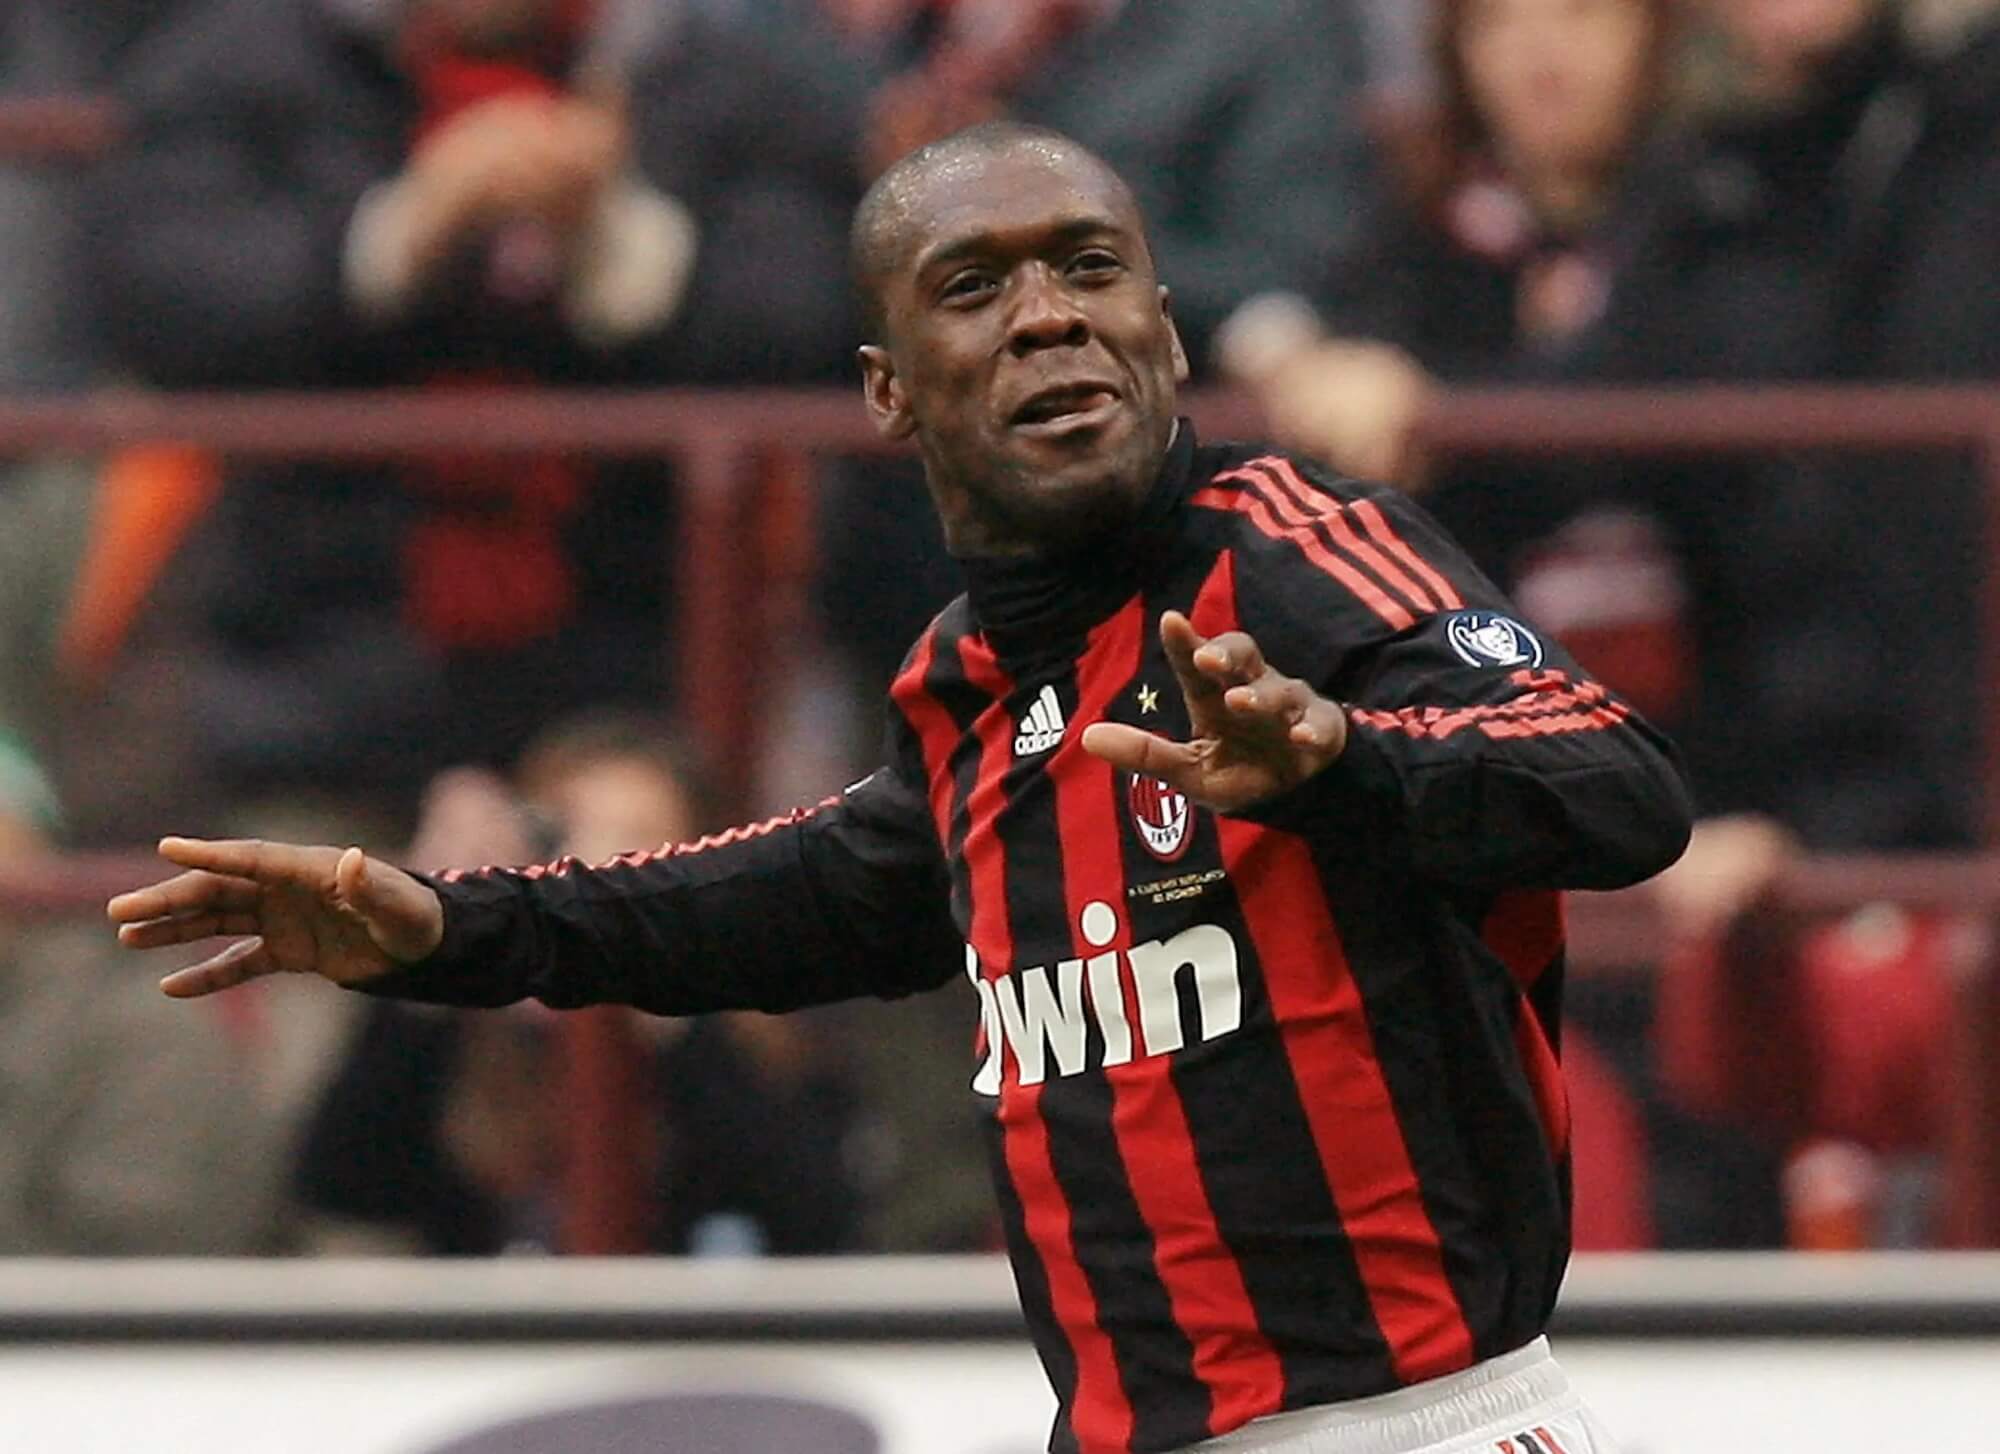 17-astonishing-facts-about-clarence-seedorf